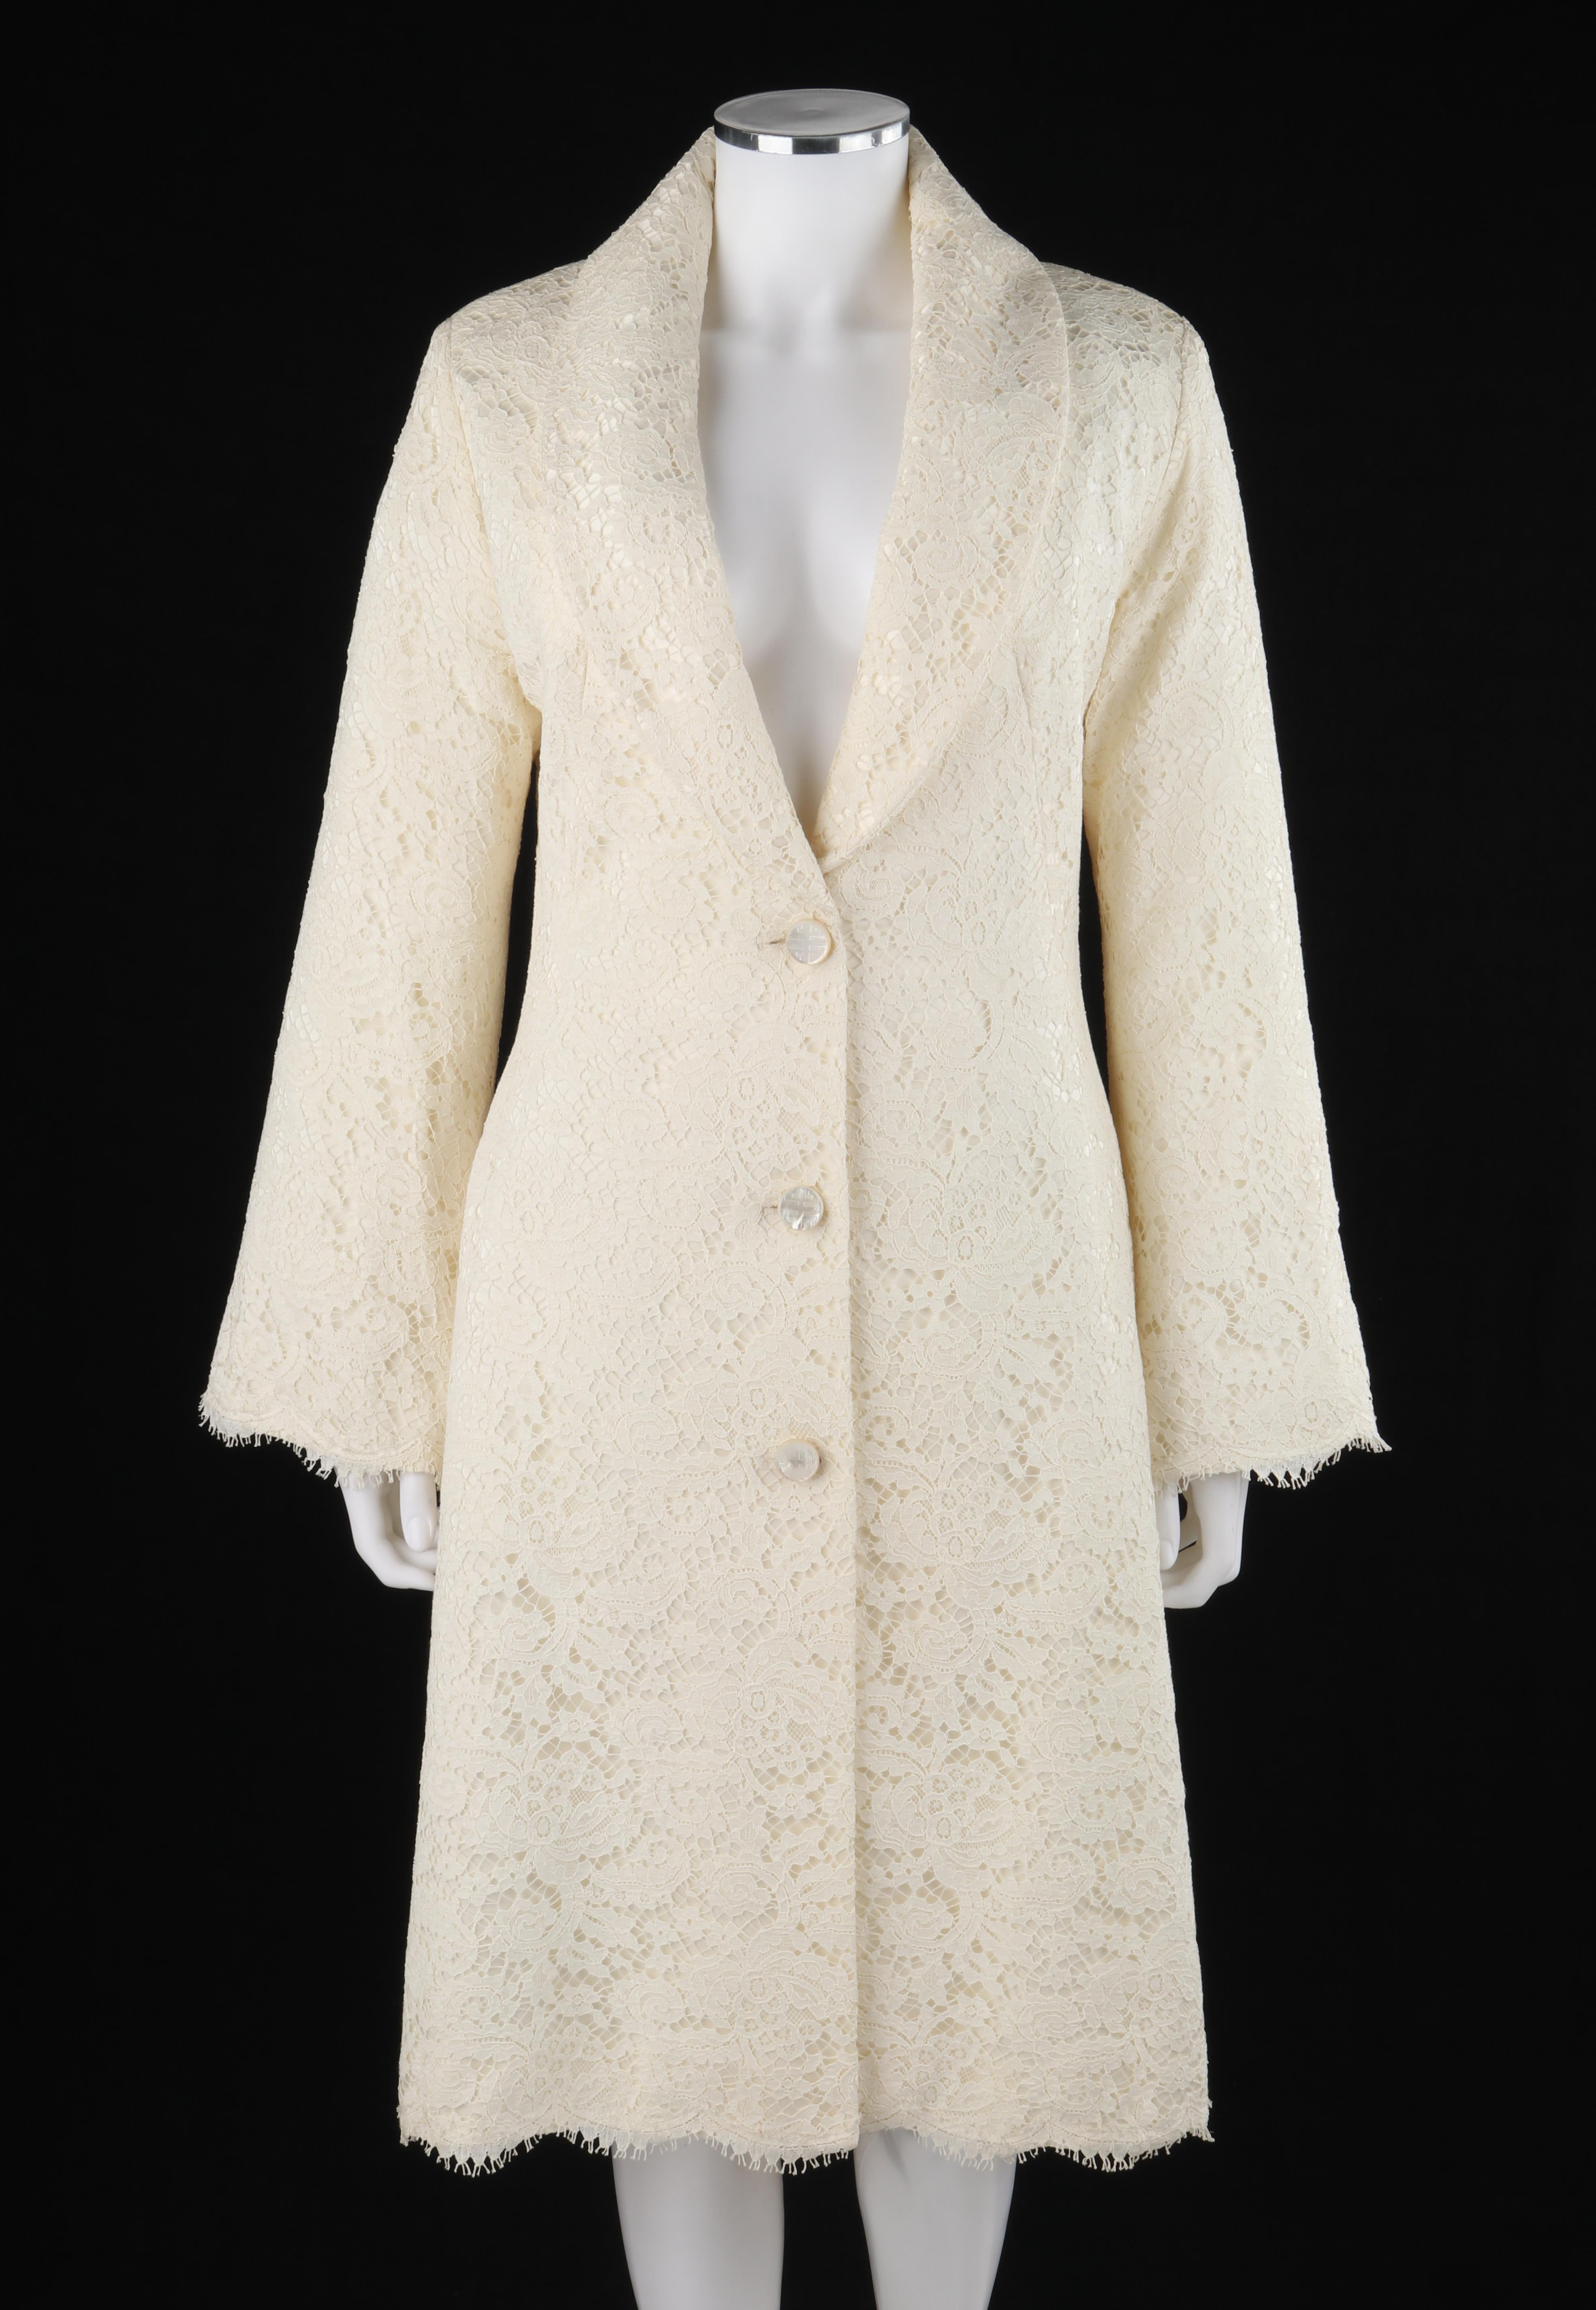 GIVENCHY Couture A/W 1999 ALEXANDER McQUEEN Ivory Floral Lace Princess Coat
 
Brand / Manufacturer: Givenchy Couture
Collection: A/W 1999
Designer: Alexander McQueen
Style: Princess coat
Color(s): Ivory
Lined: Yes
Marked Fabric Content: “66%